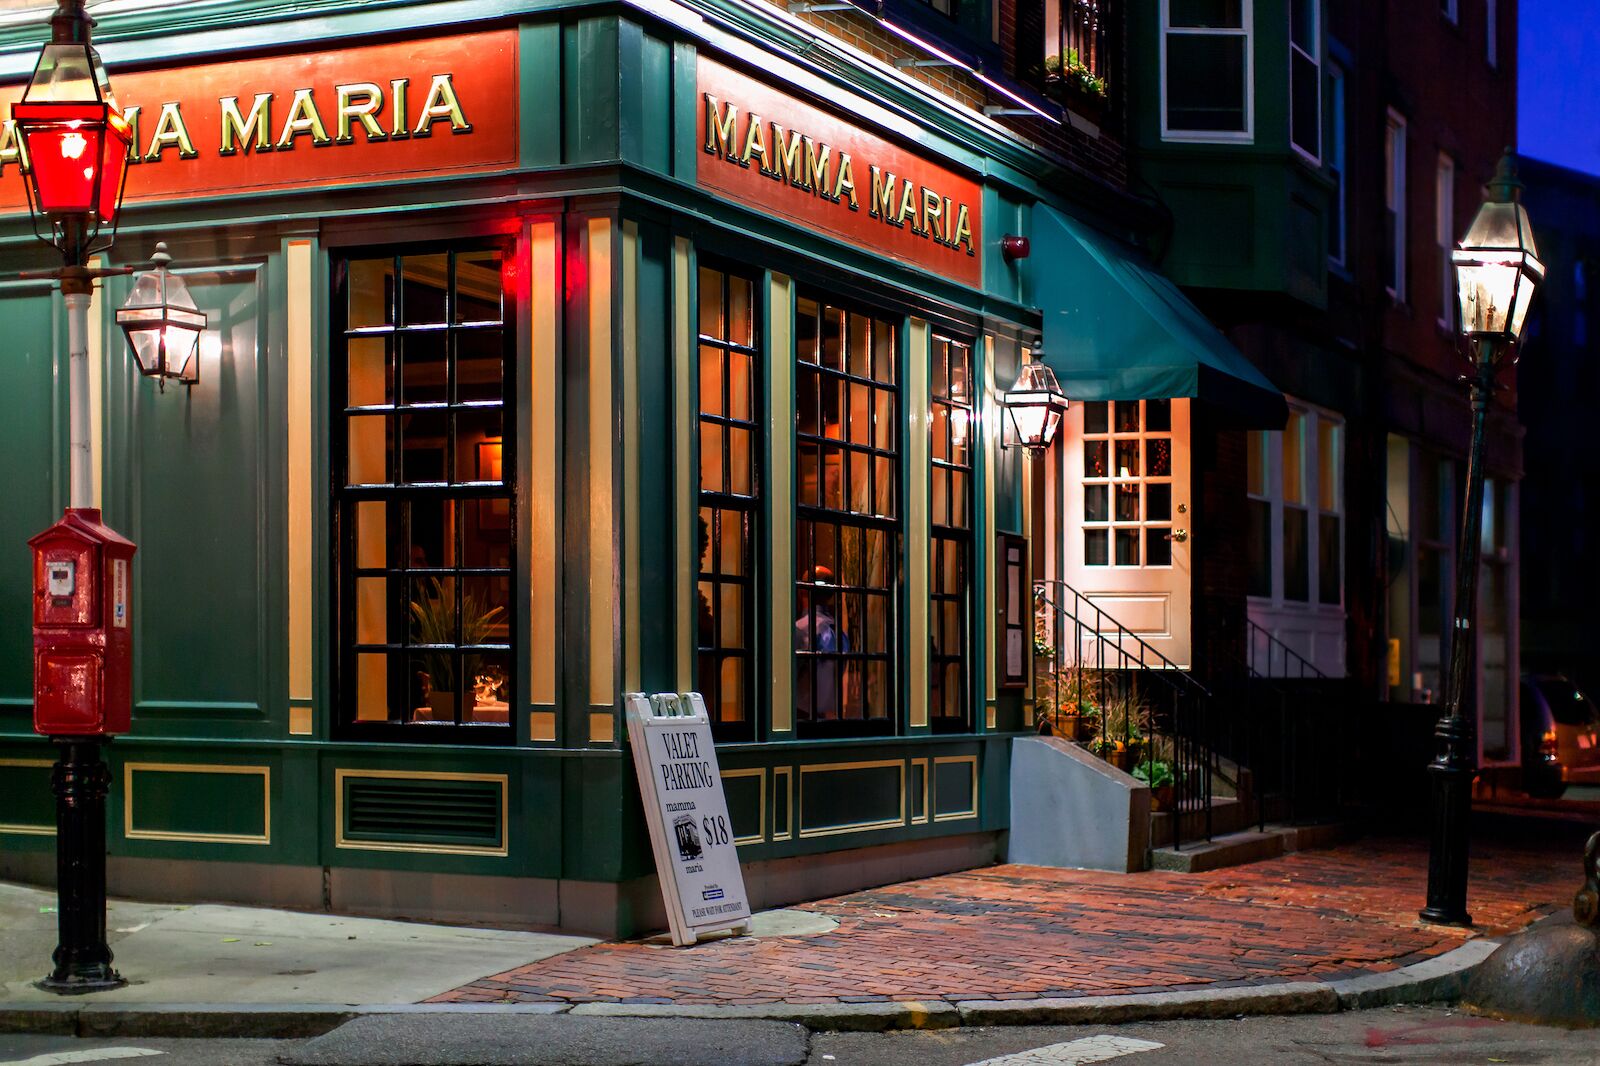 Exterior view of the restaurant Mamma Maria in Boston's Little Italy